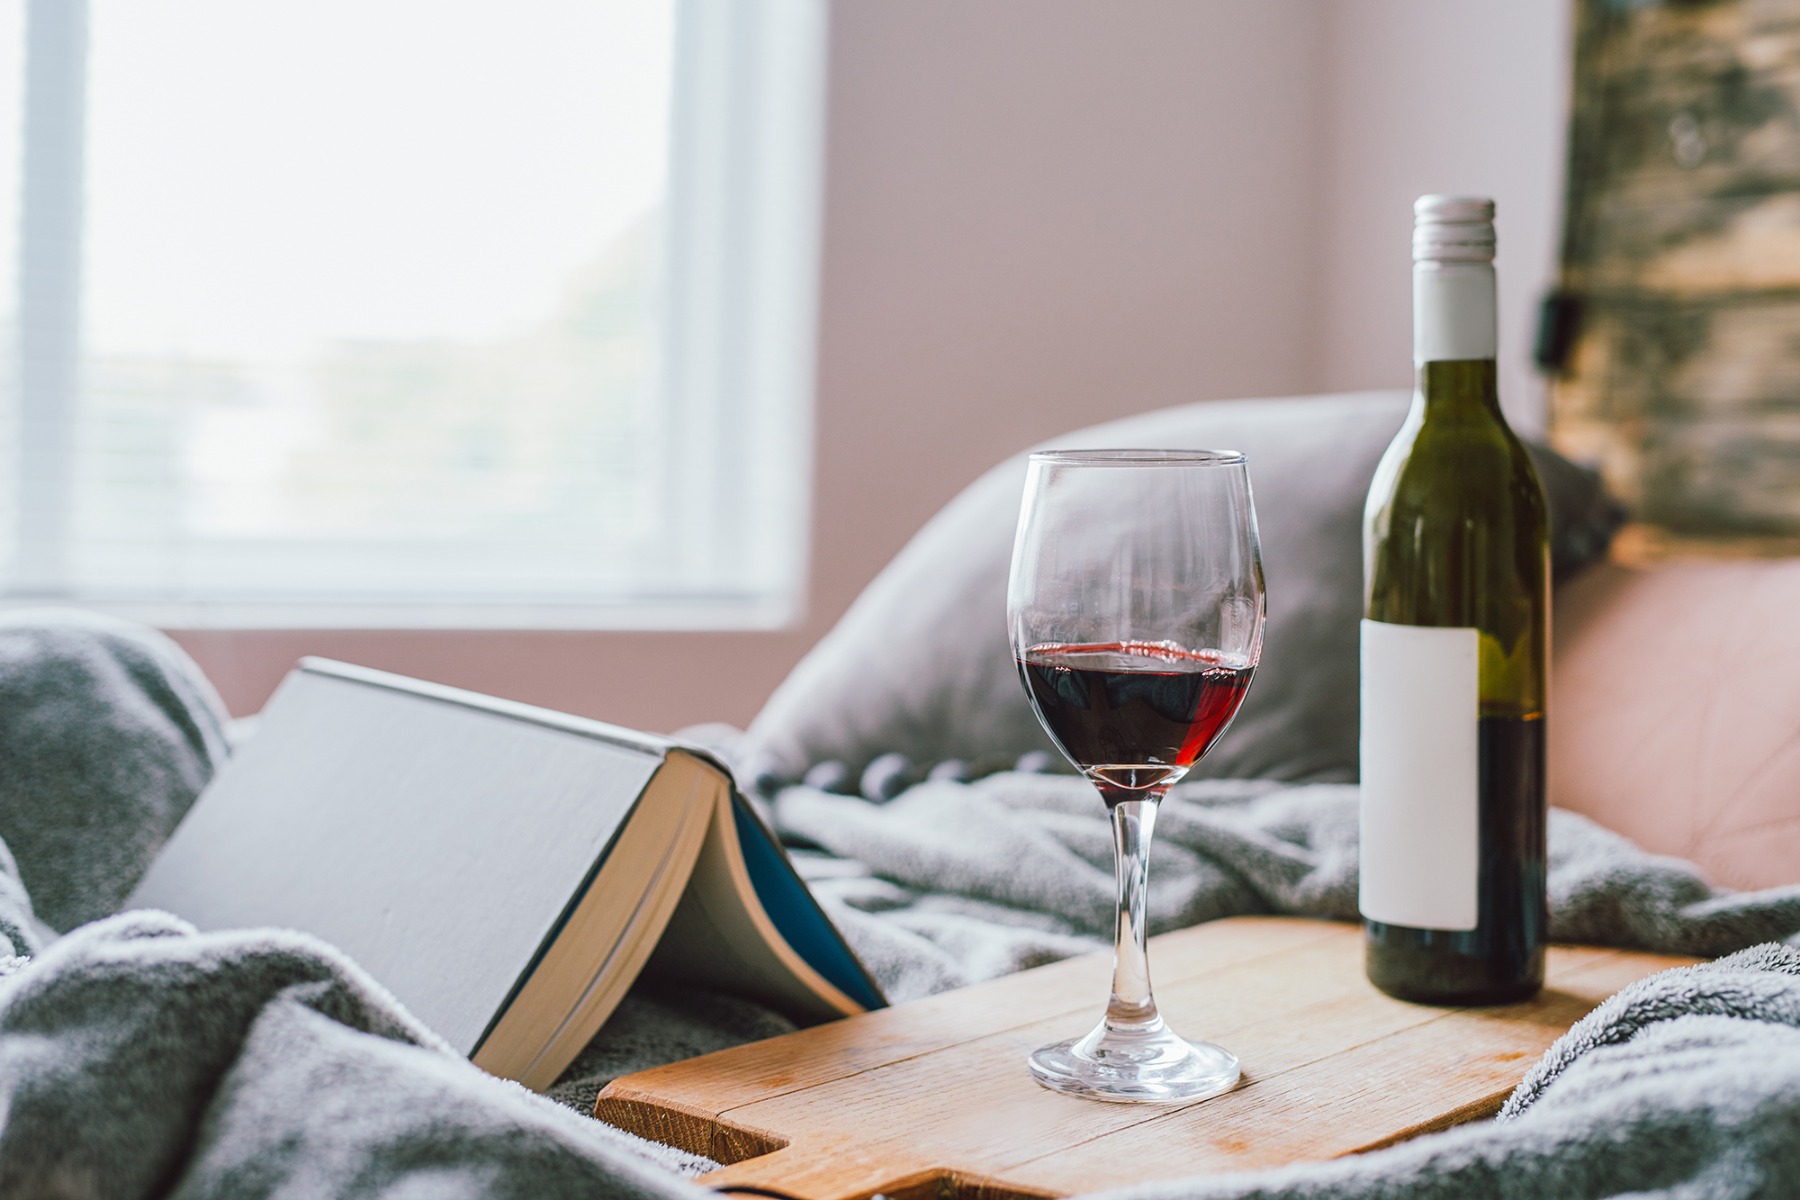 Red wine glass and wine bottle next to a book